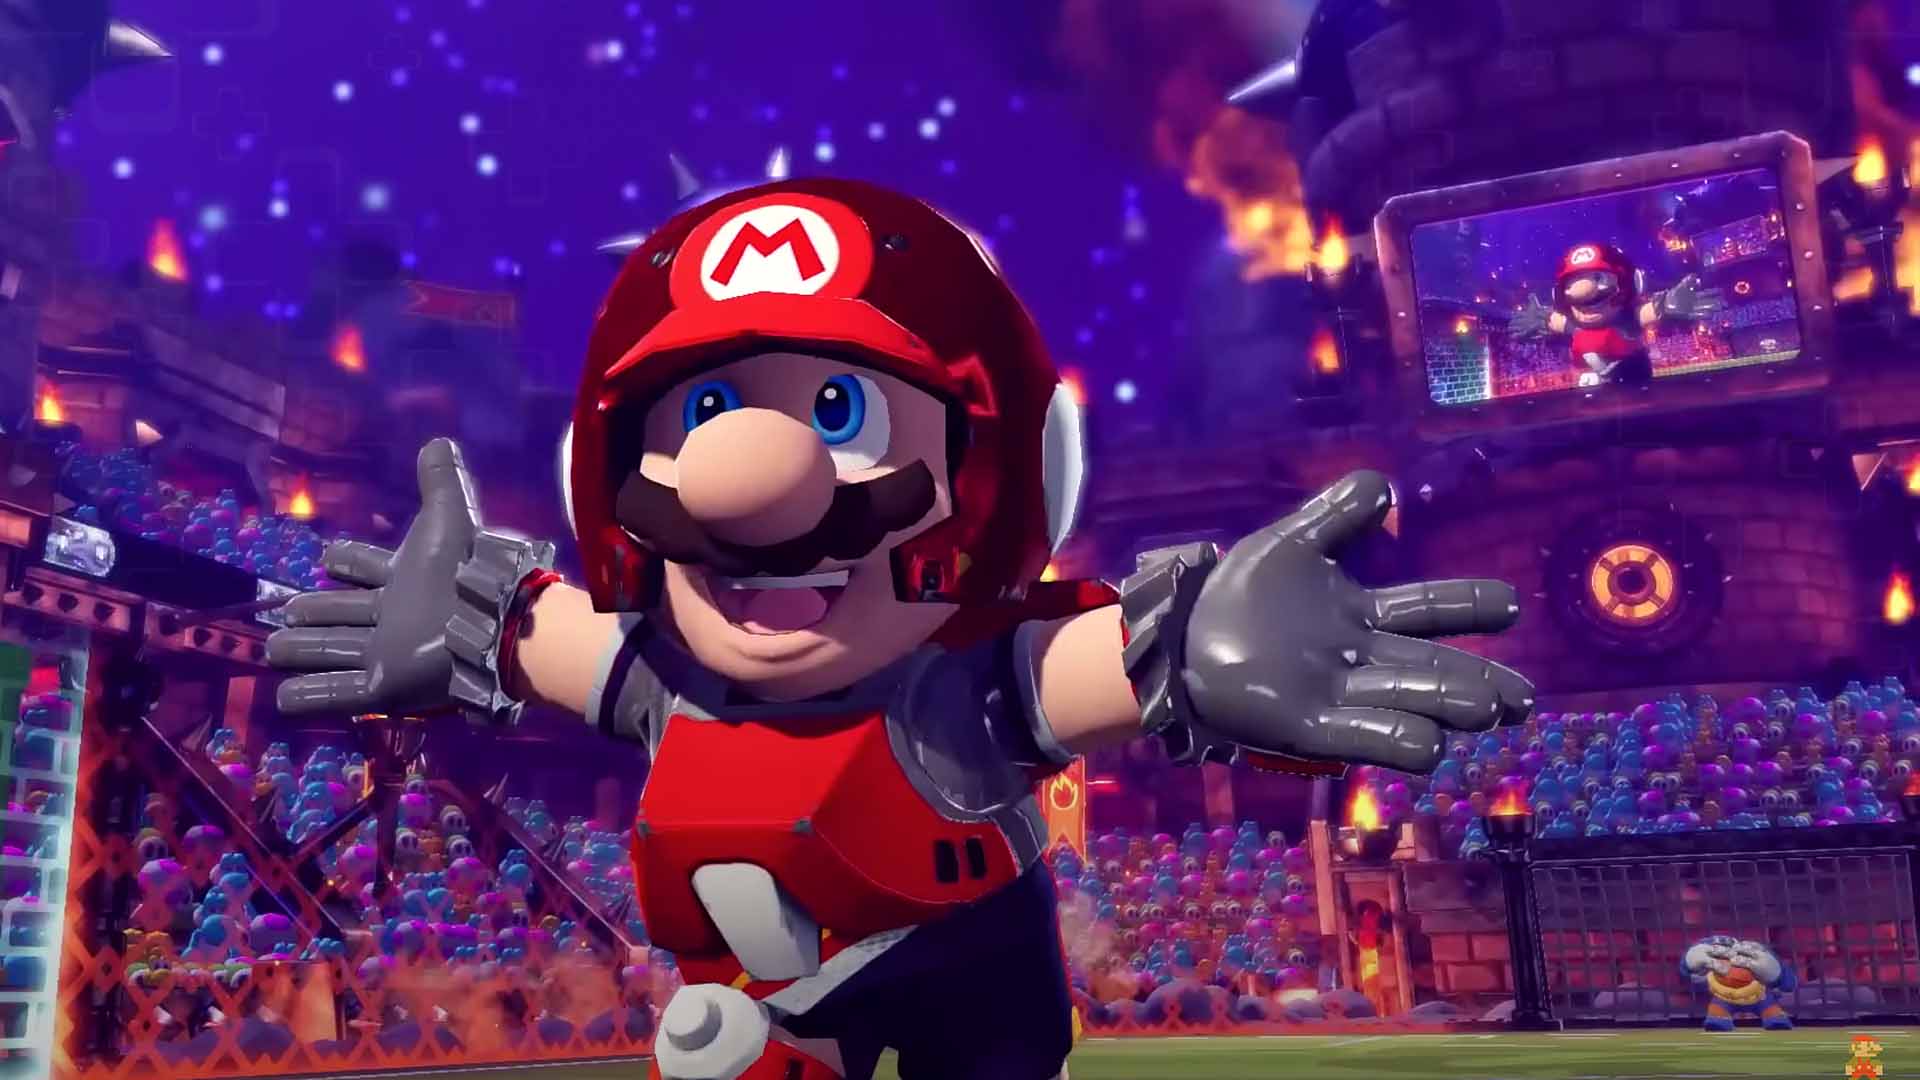 40% Of Europe's Mario Strikers Switch Sales Come From Just One